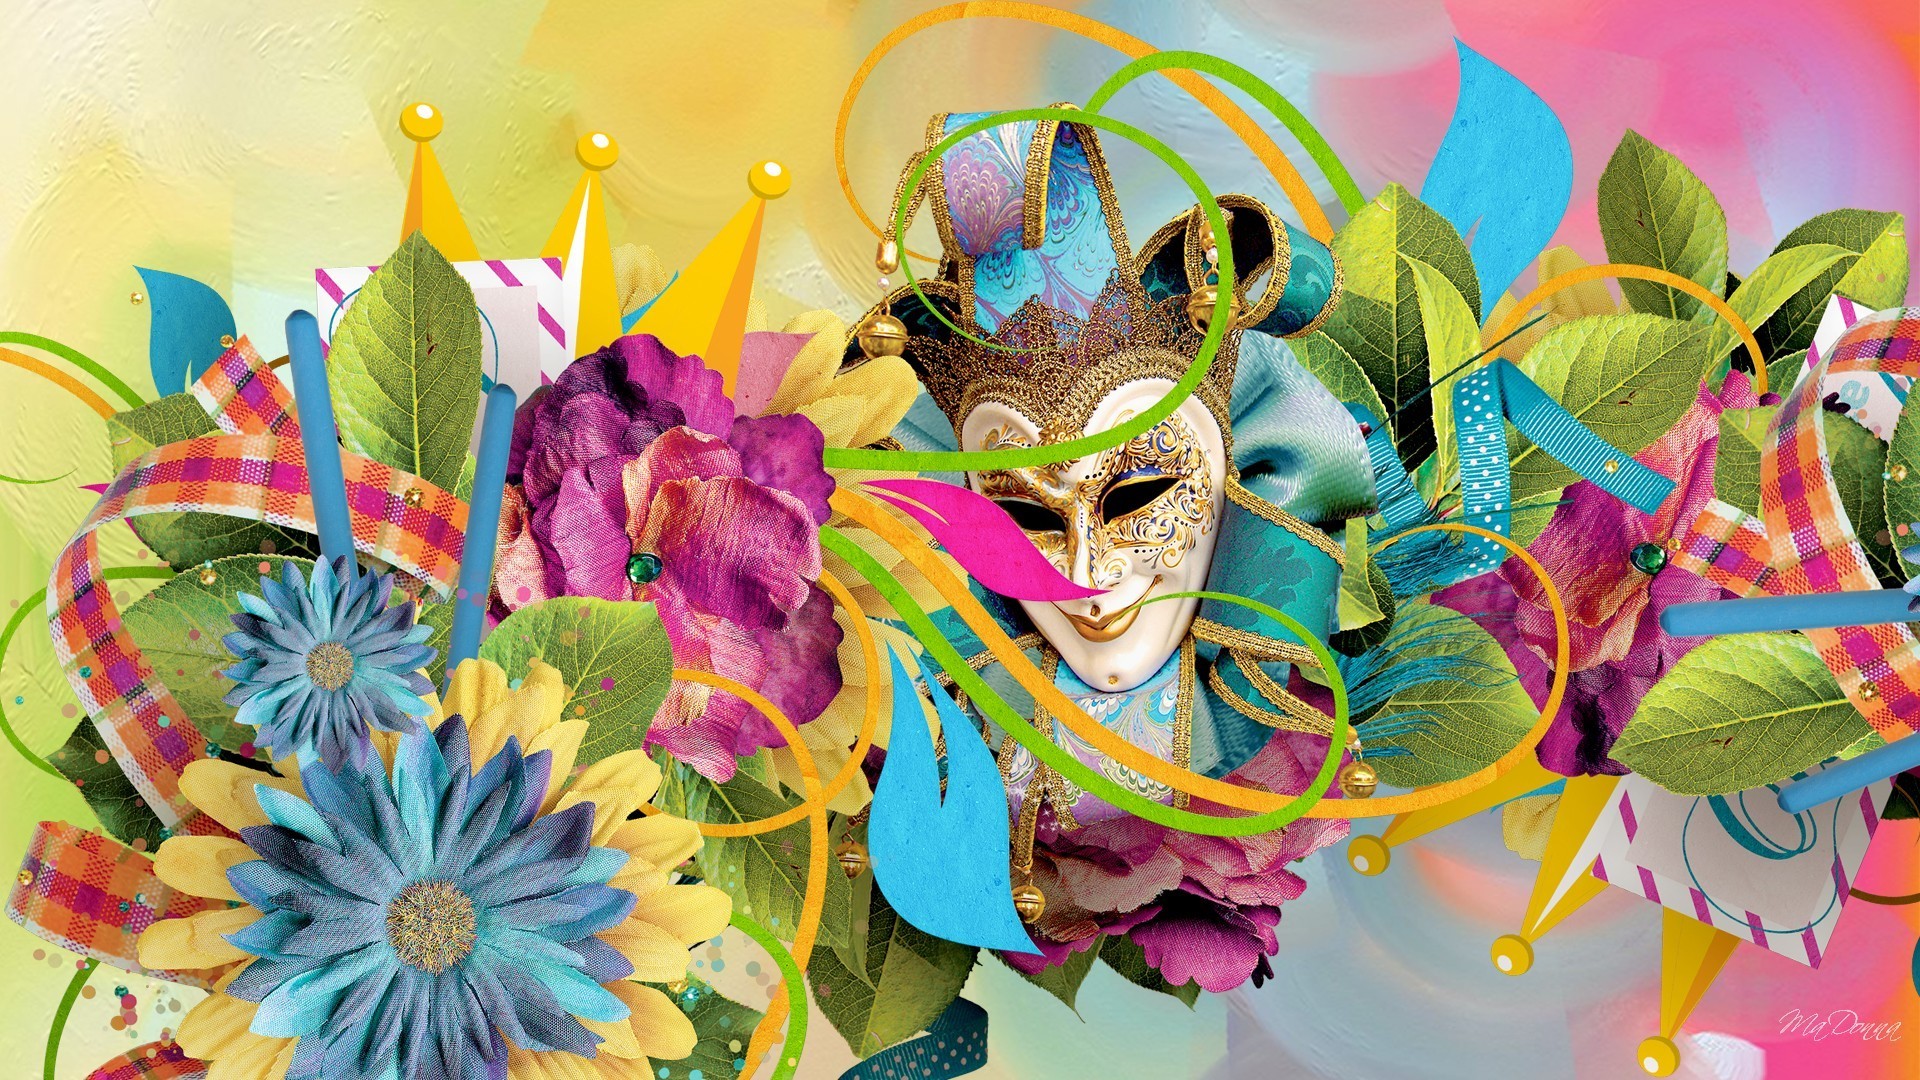 1920x1080 Download Carnival Colorful New Orleans Flowers Celebrate Brazil Lent Mask  Bright Masquerade Mardi Gras Ribbons Street Party Streamers Flower Nice  Wallpaper